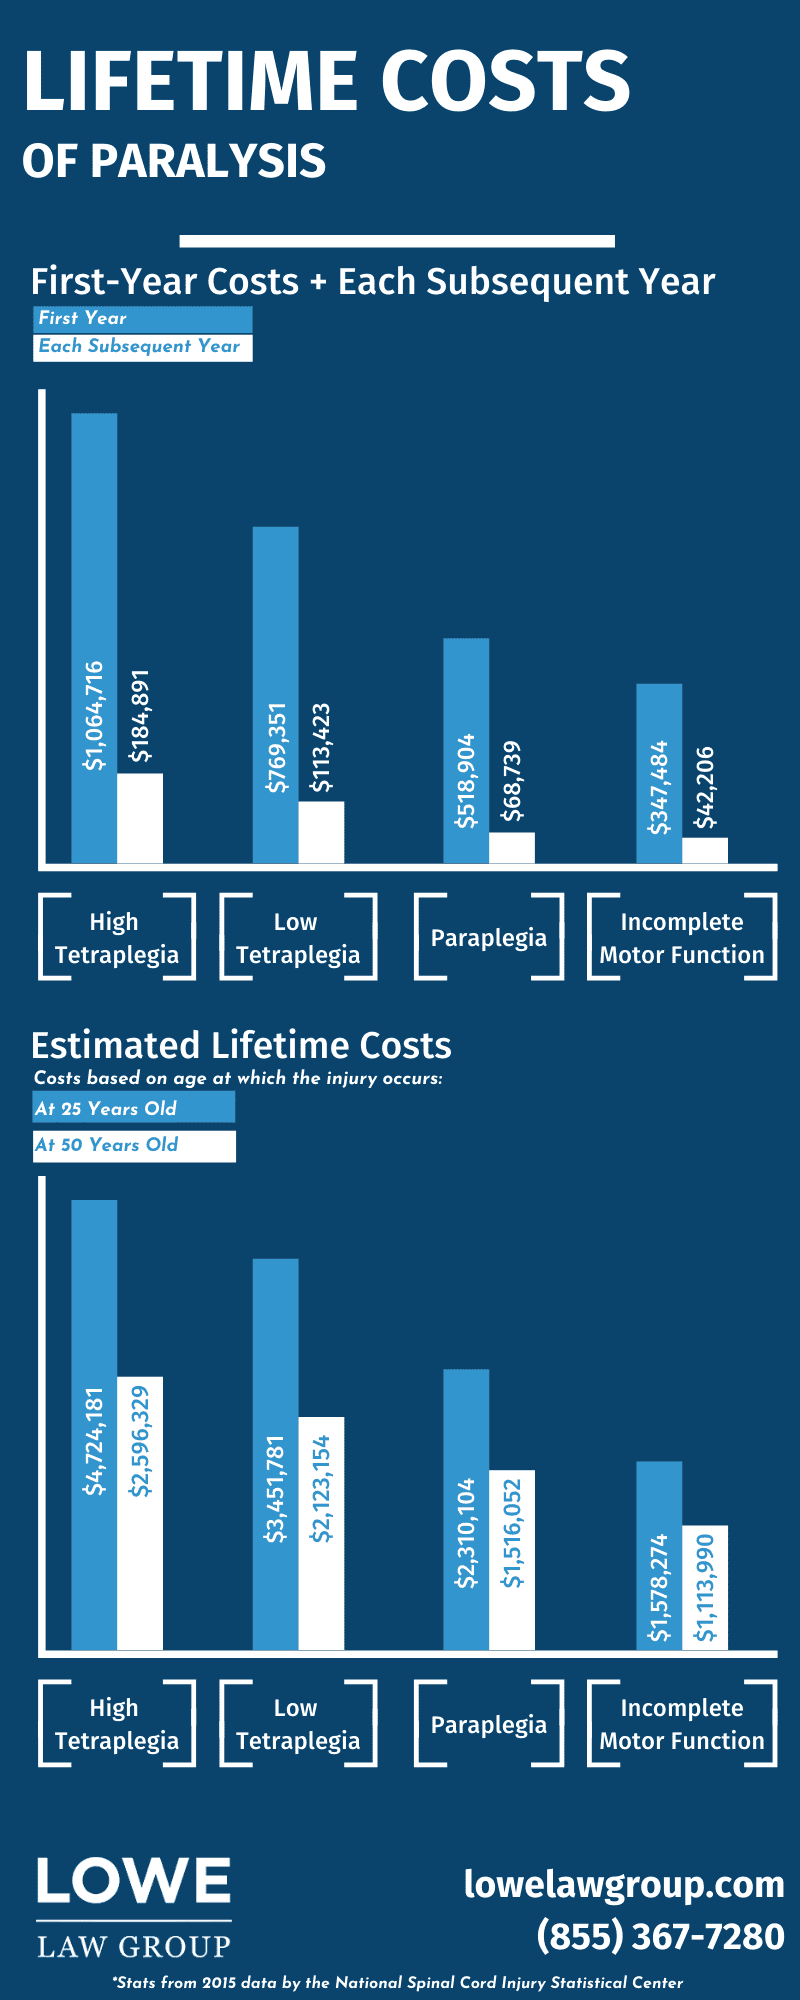 This infographic details the lifetime costs of paralysis which differs based on the severity of the injury and the age at which the injury occurs. A person who is 50 and suffers incomplete motor function loss can spend just over $1.1 million while a 25 year old with high tetraplegia can spend around $5 million